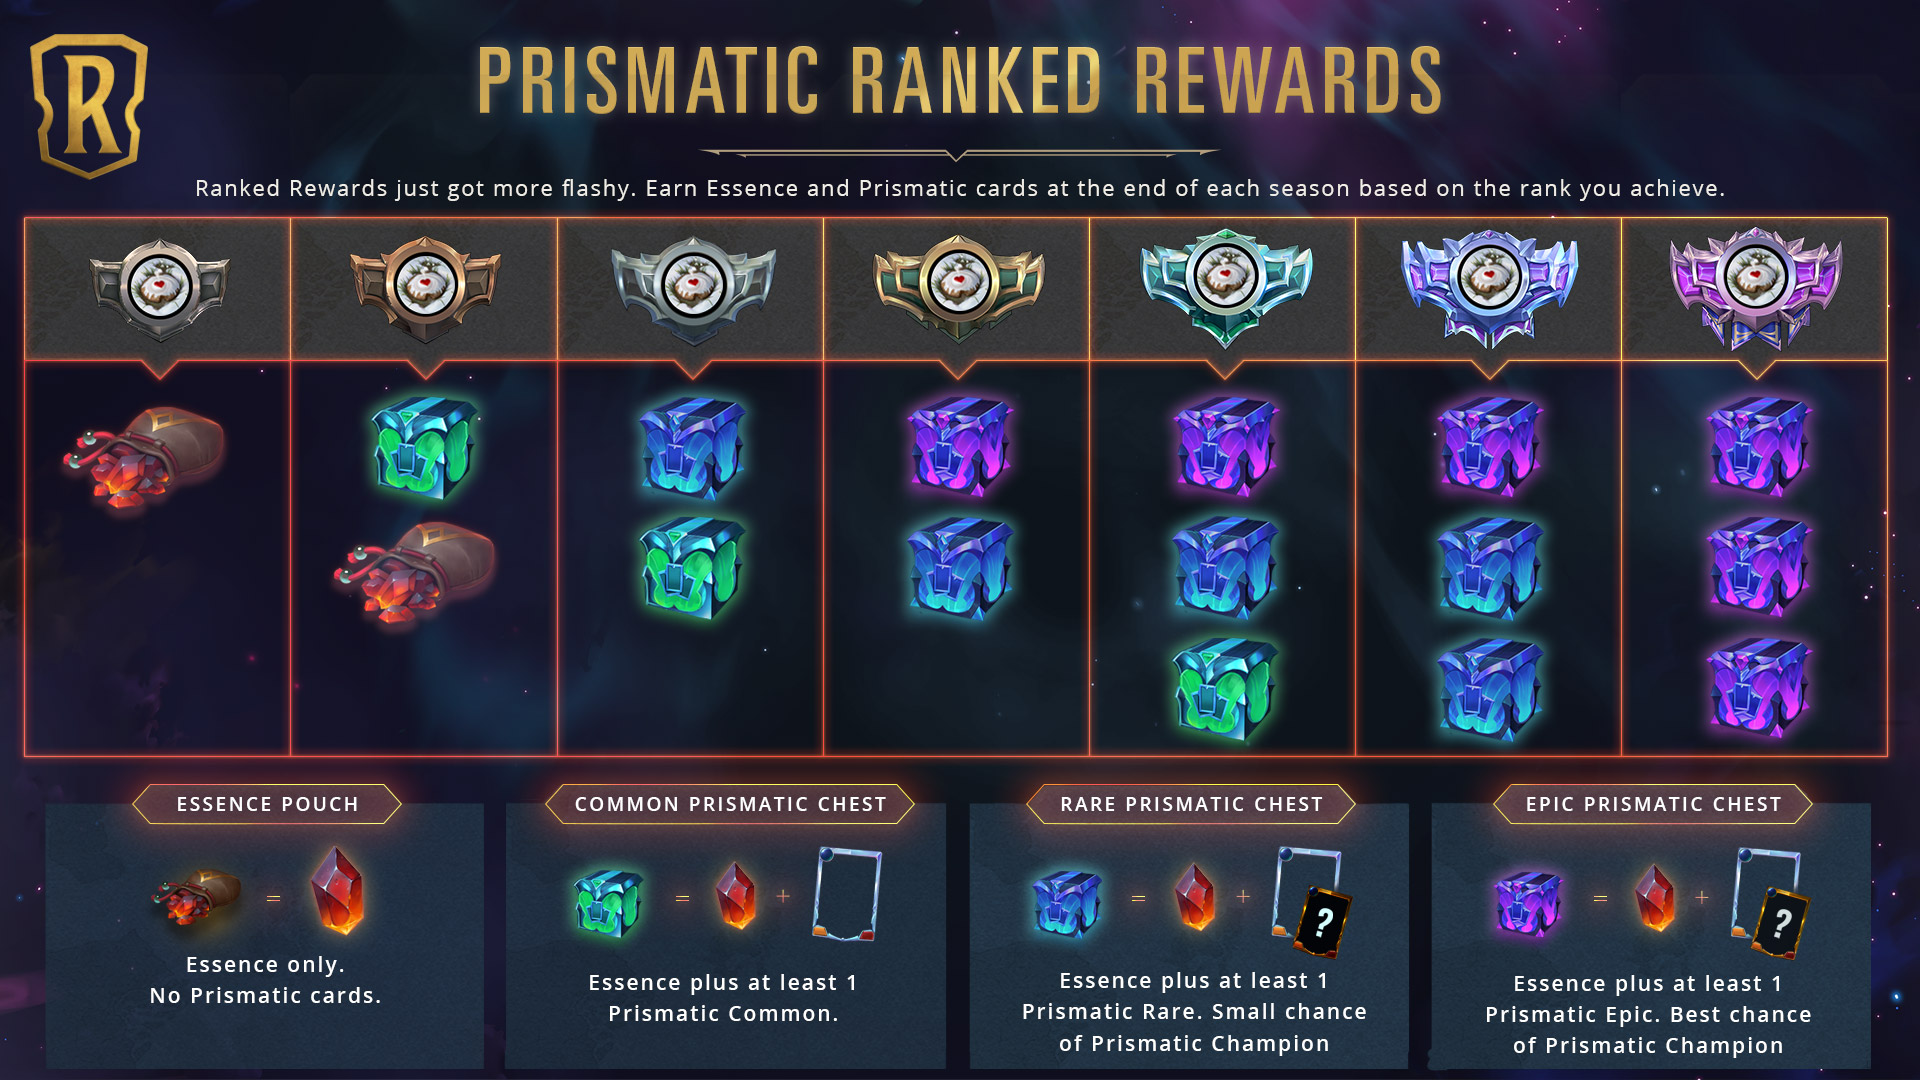 A chart of Prismatic ranked rewards players can earn in Legends of Runeterra.